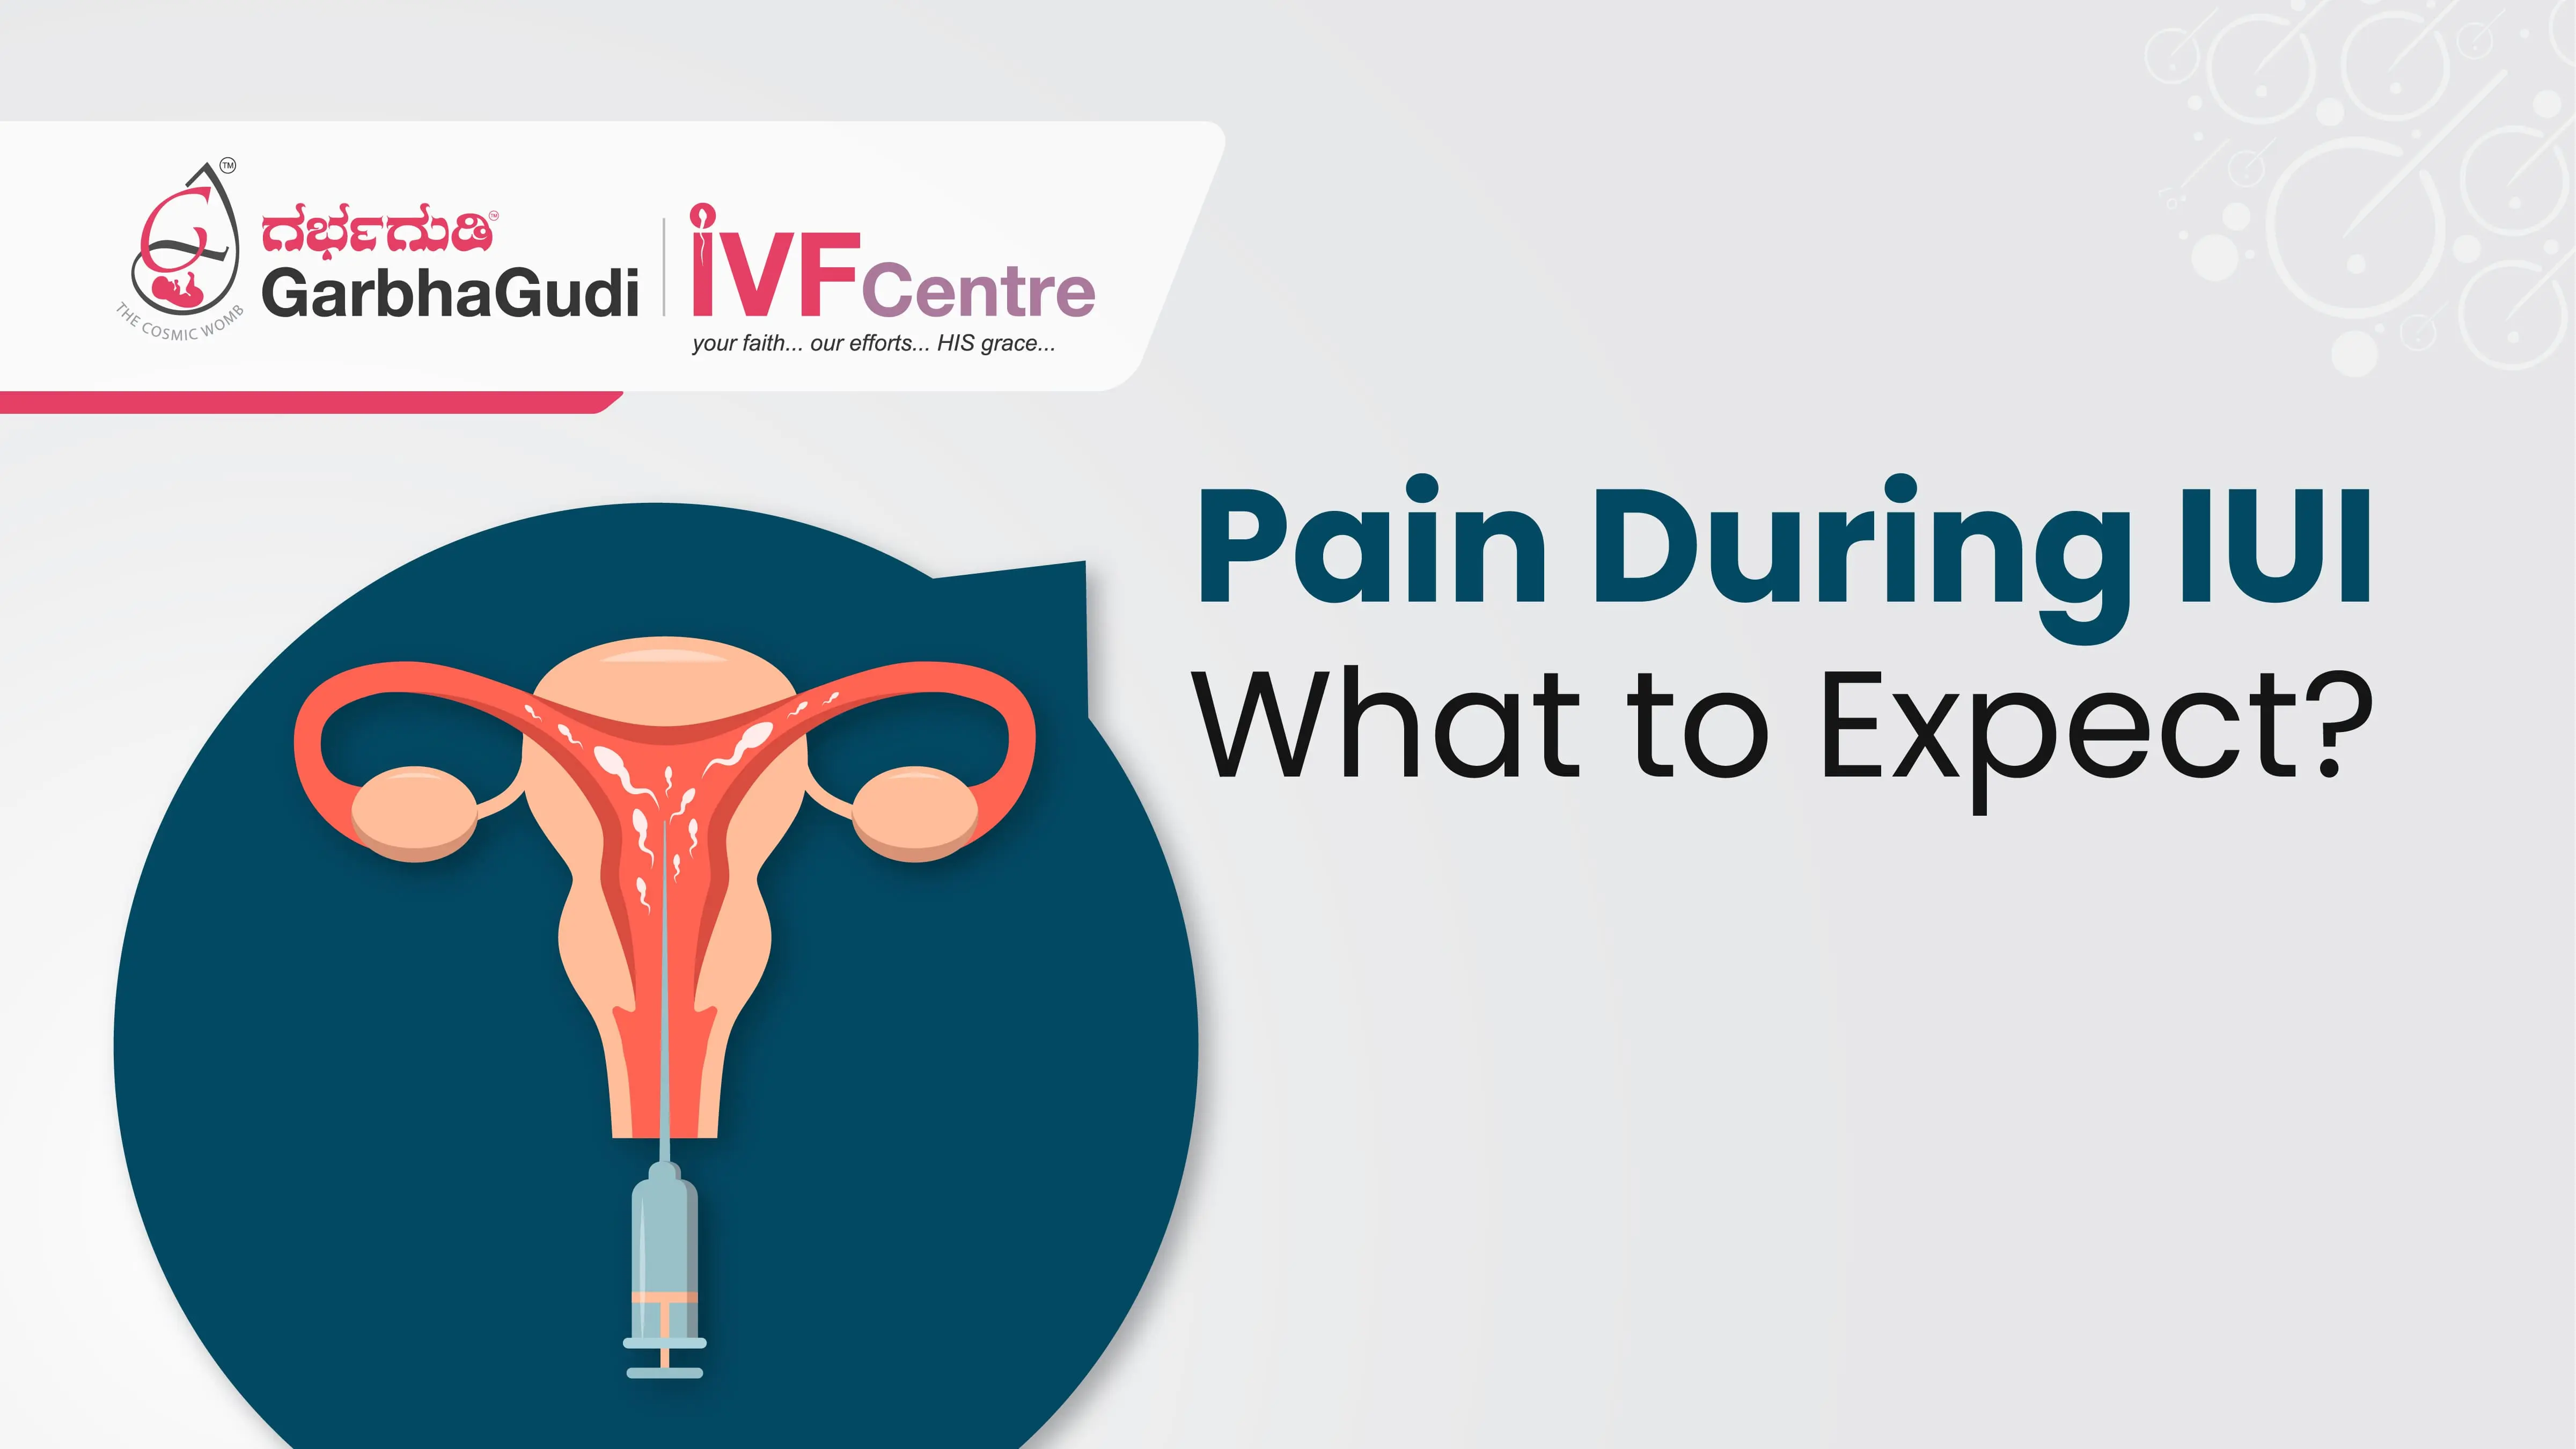 Pain During IUI - What to Expect?